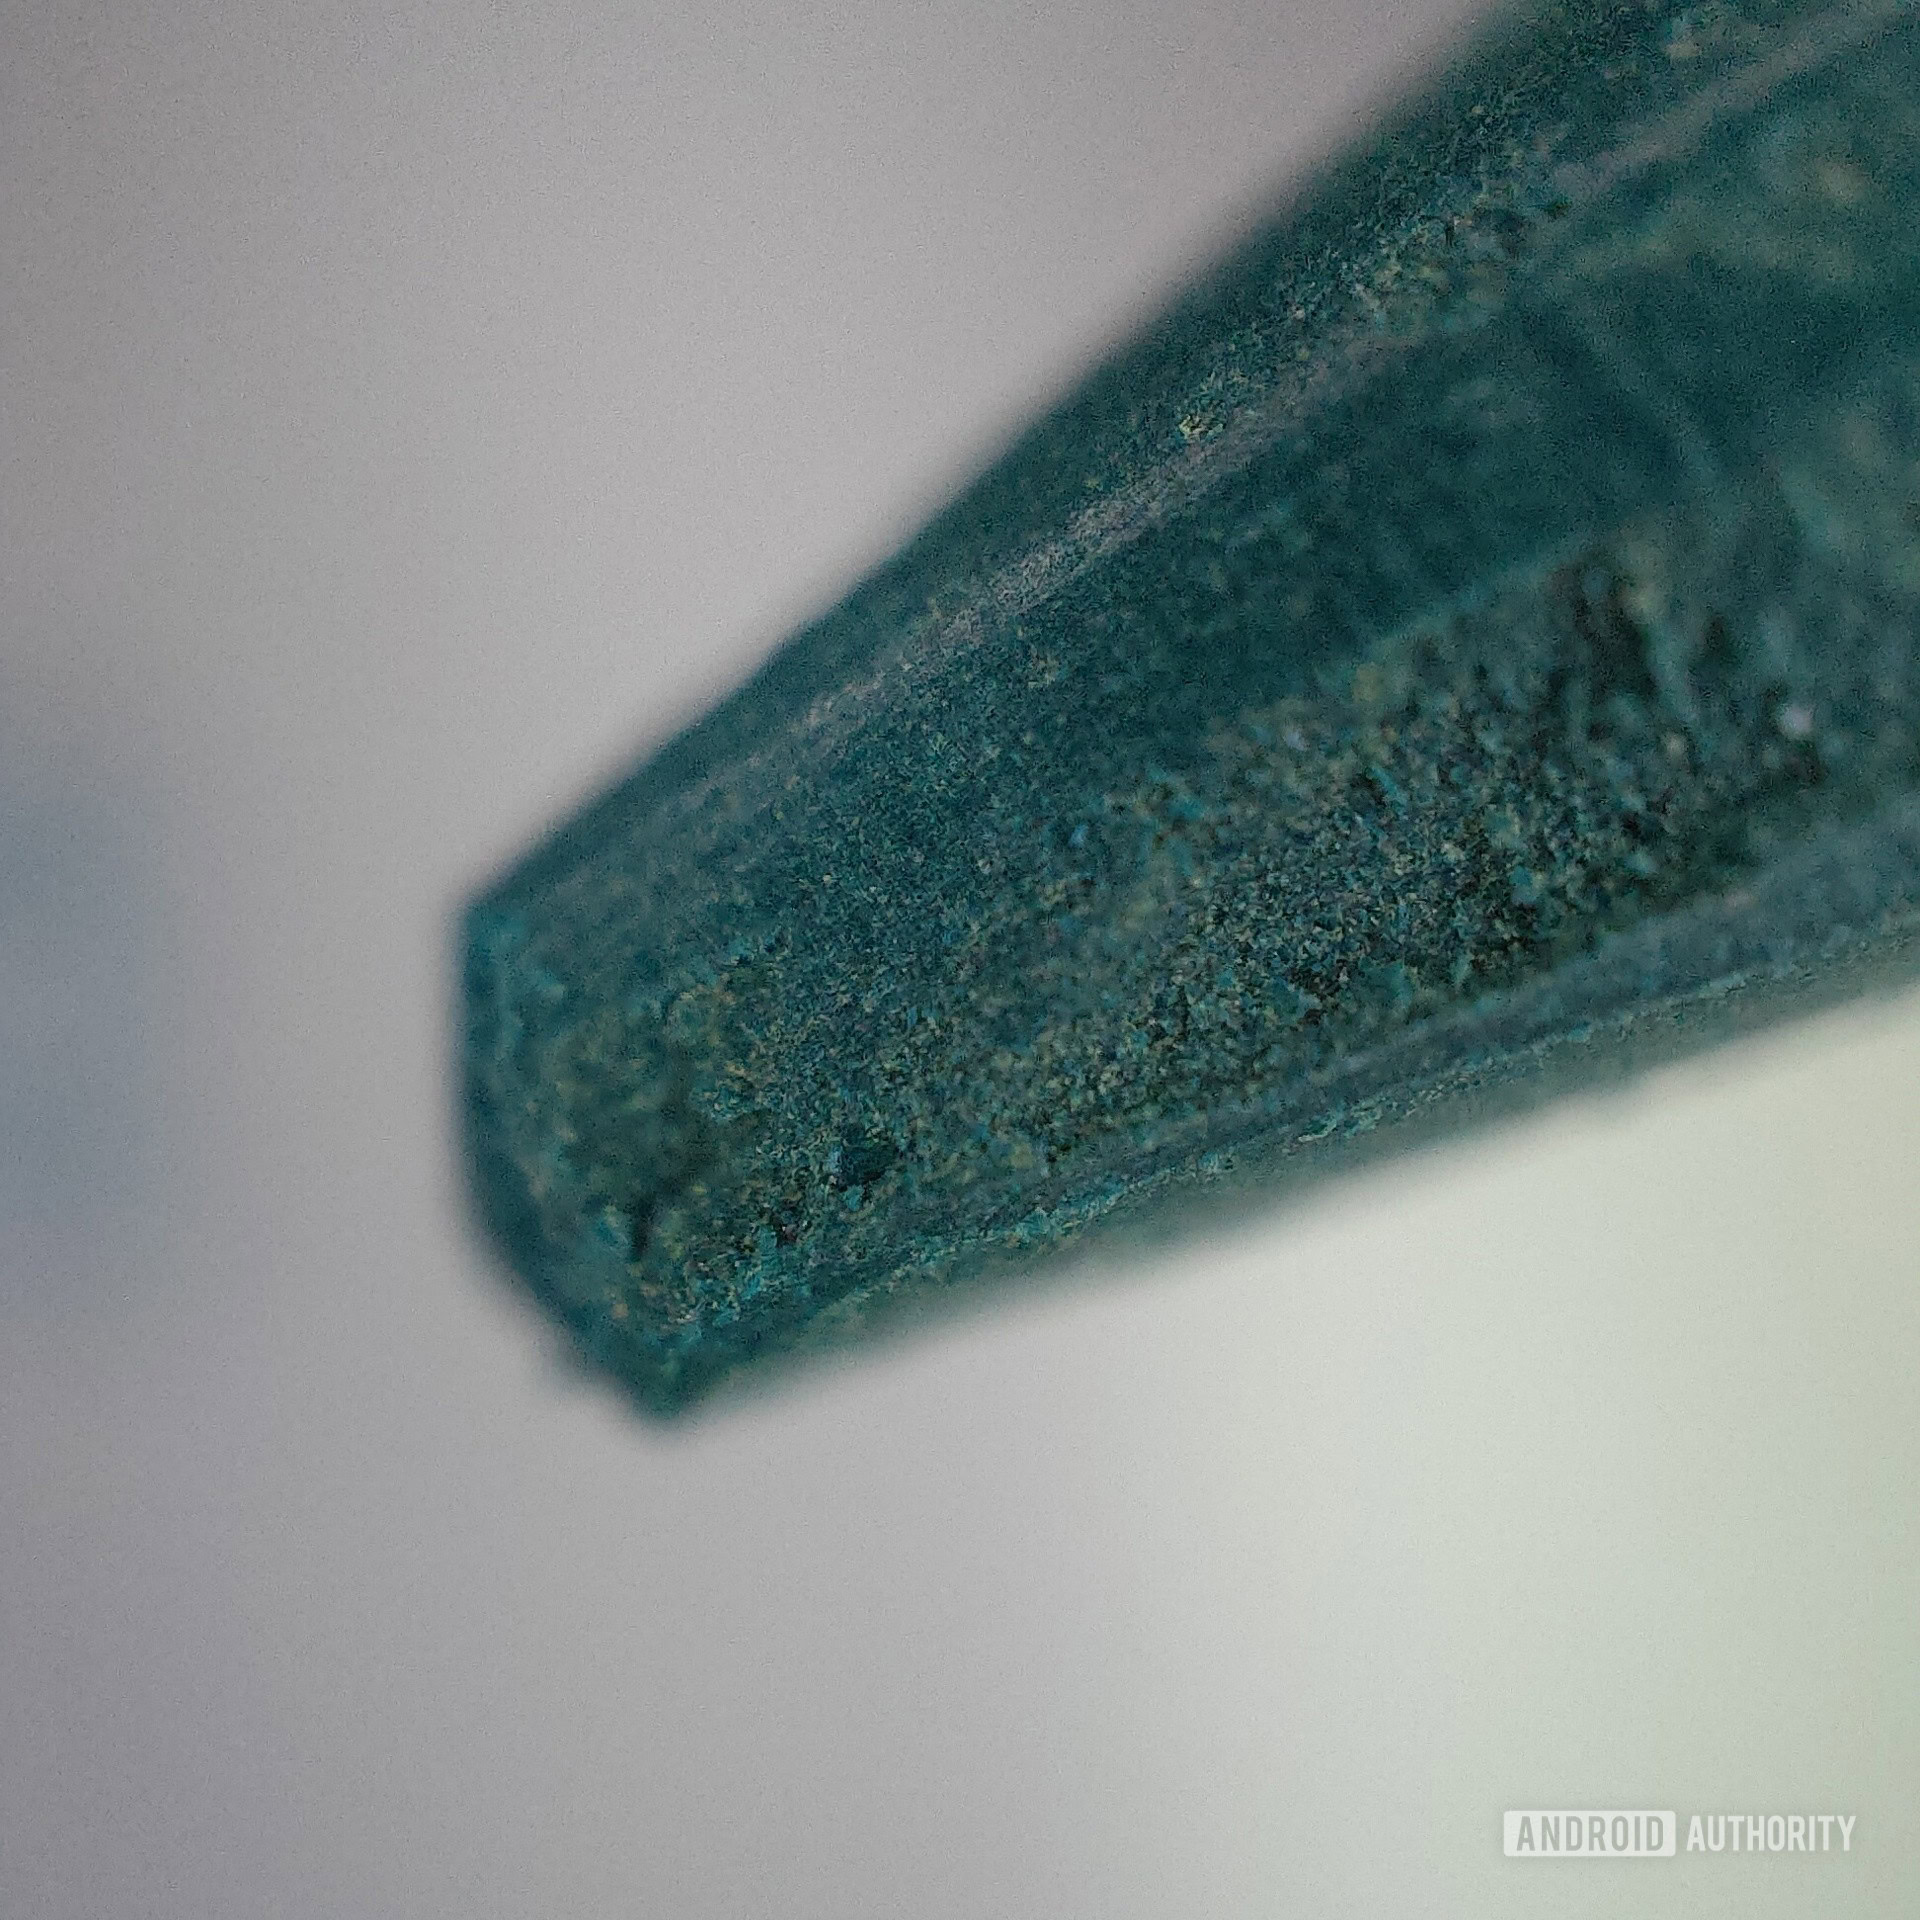 A close-up microscope shot showing a close-up of a pencil.